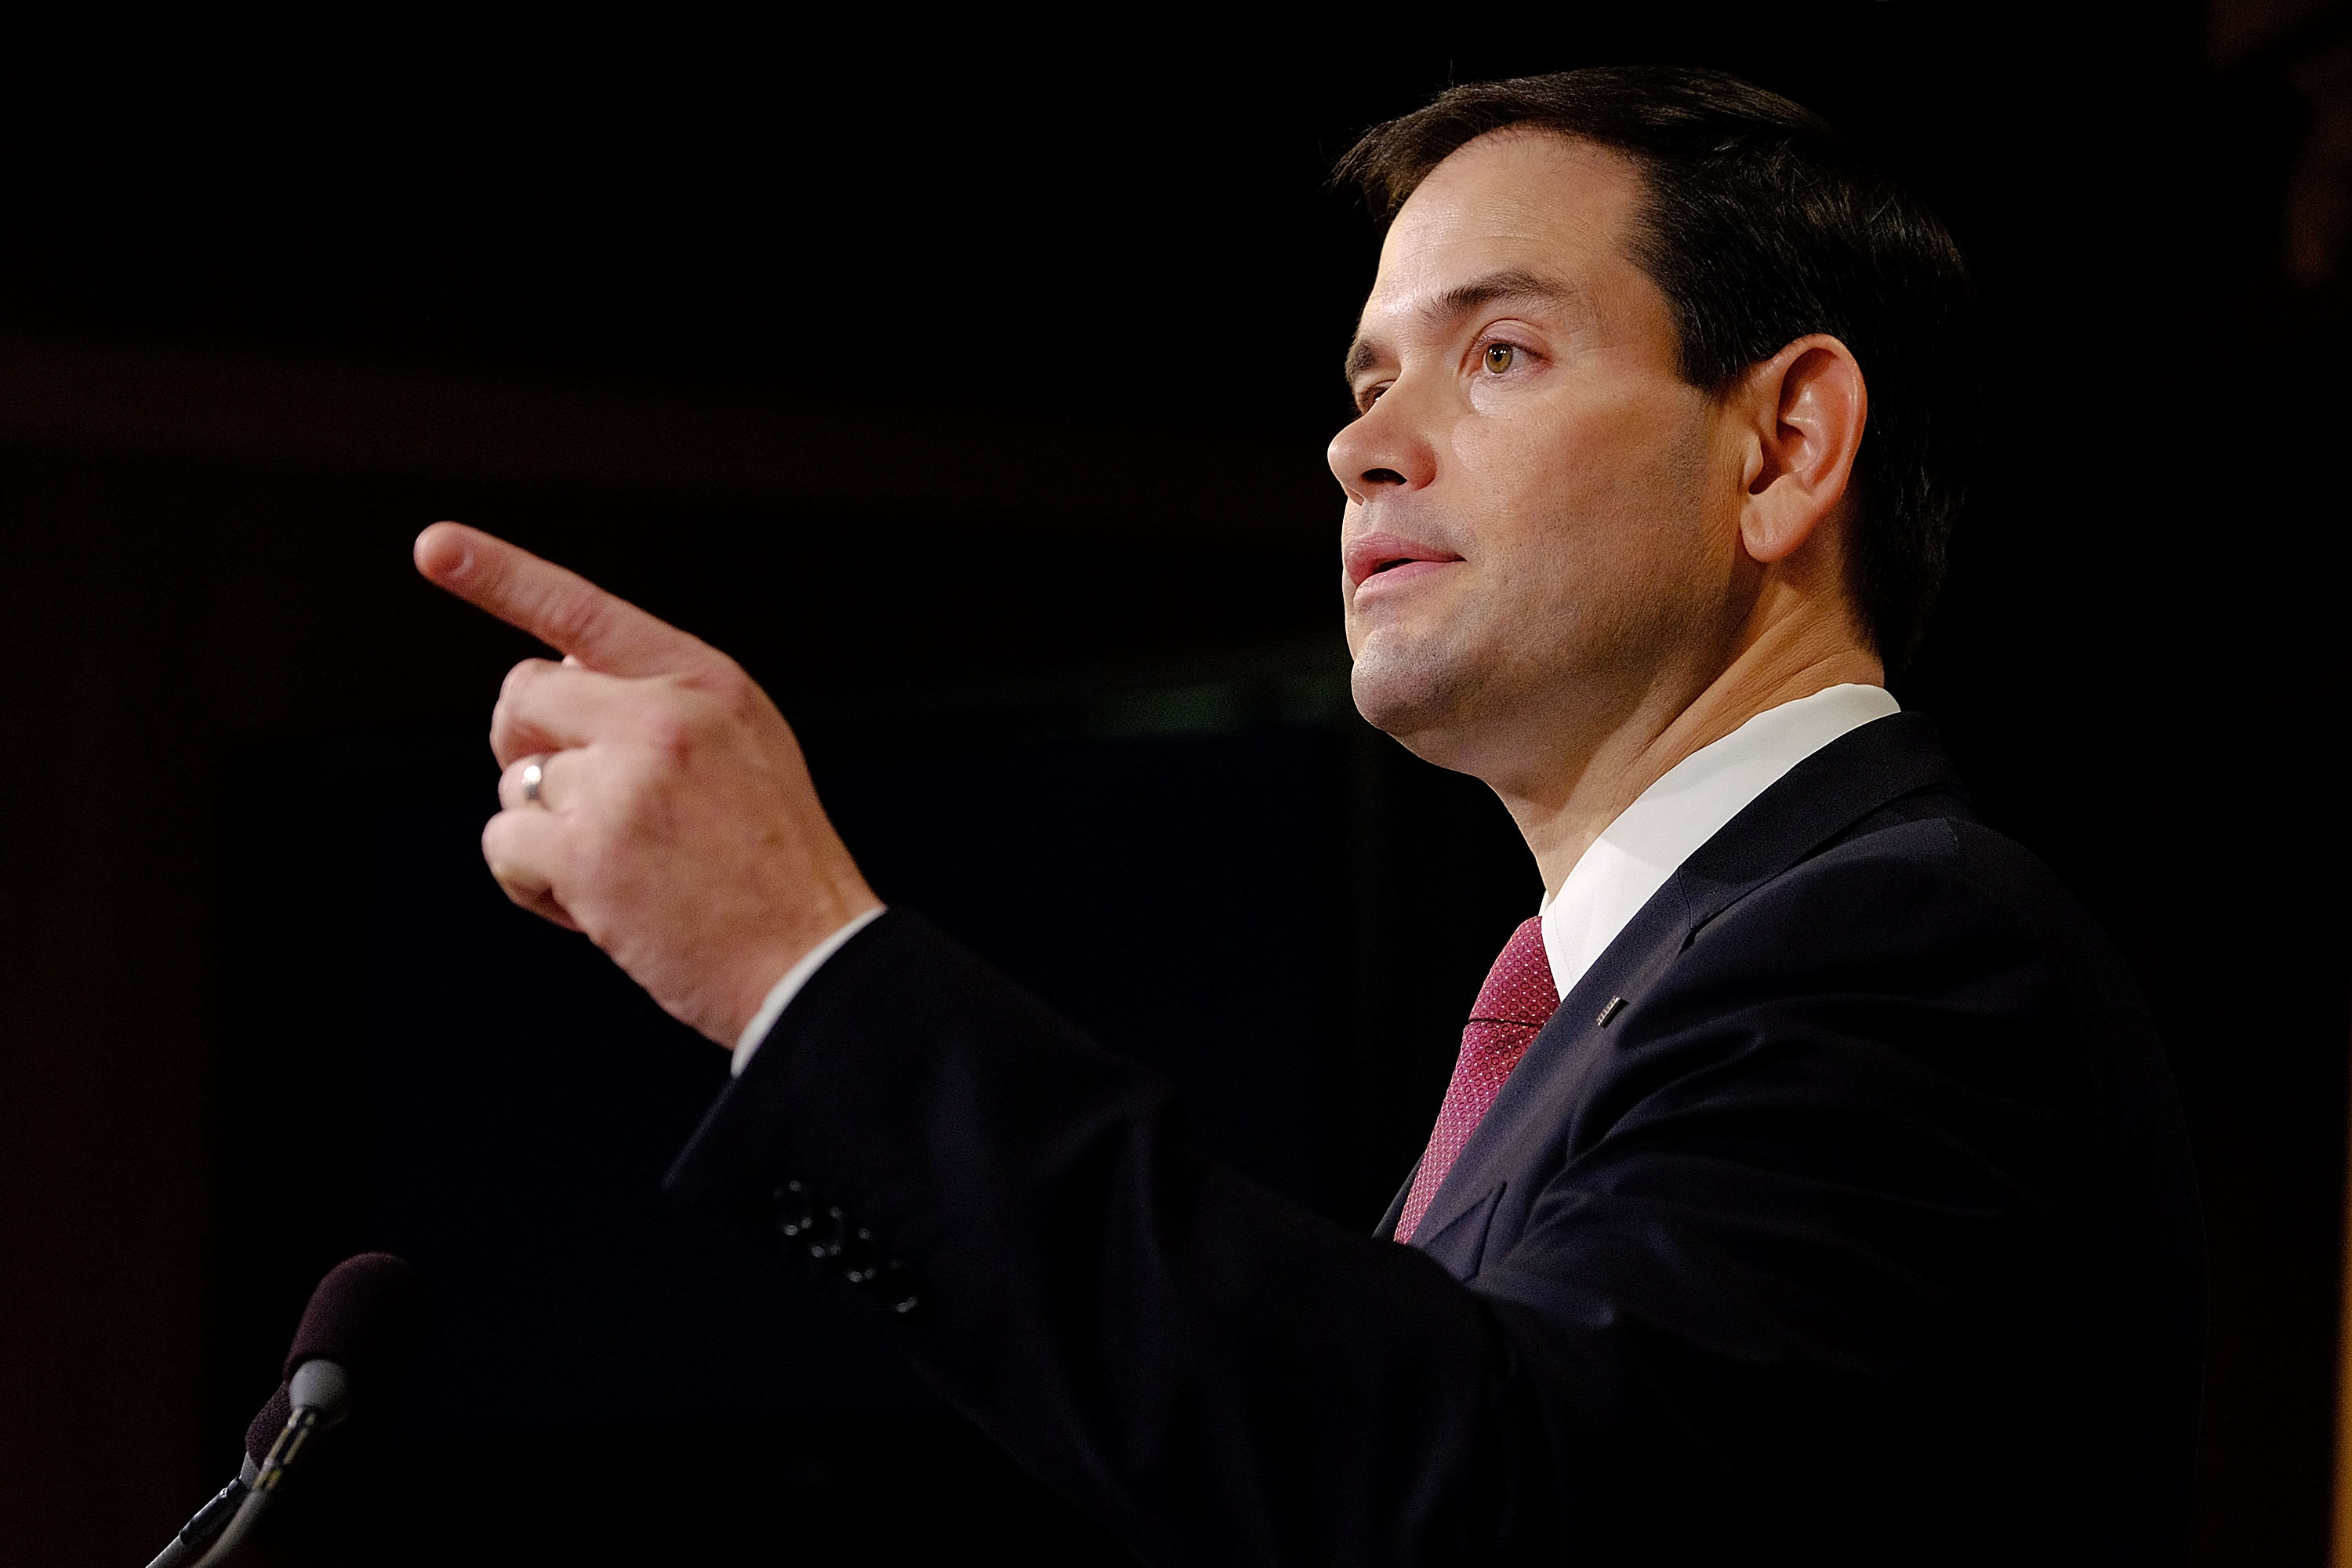 Sen. Marco Rubio (R-FL) reacts to U.S. President Barack Obama's announcement about revising policies on U.S.-Cuba relations on December 17, 2014 in Washington, DC. (T.J. Kirkpatrick—Getty Images)